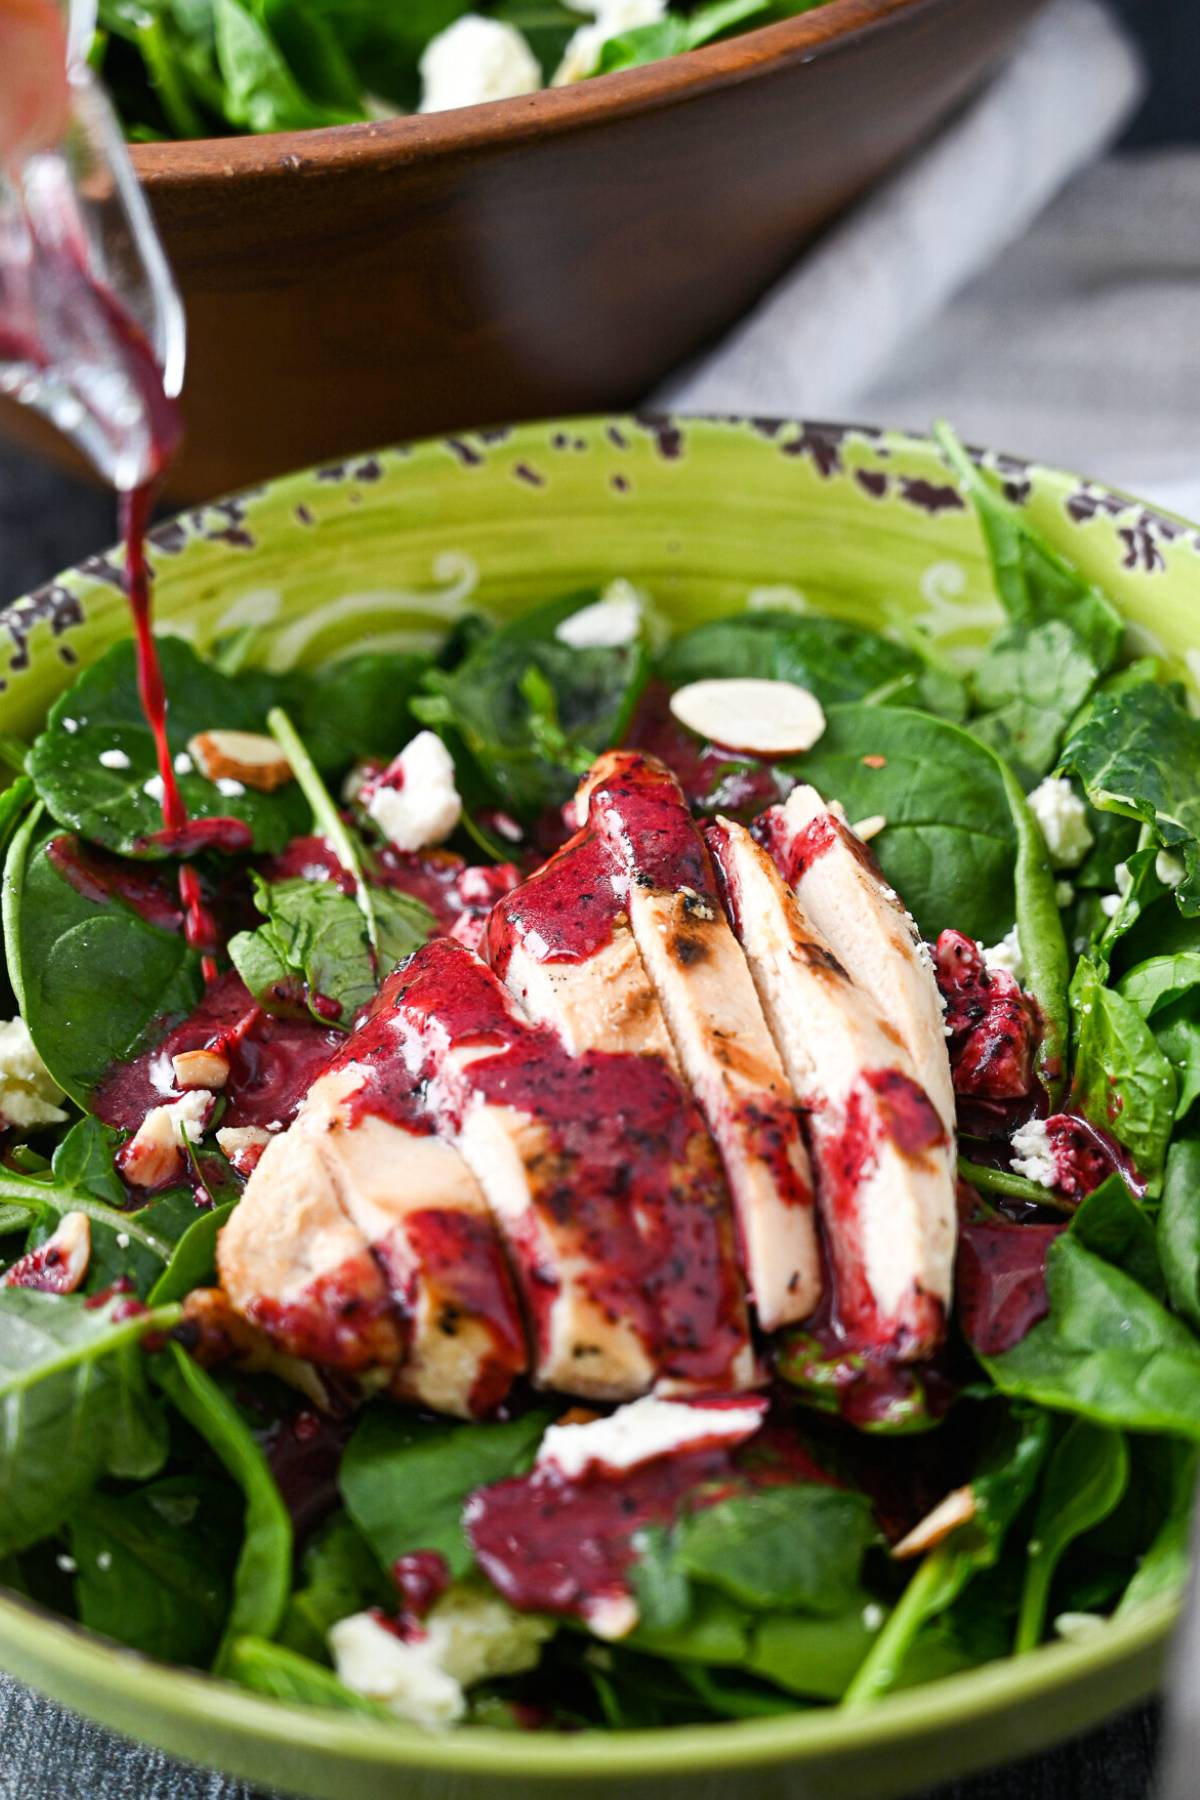 kale and spinach salad with a chicken breast with blueberry vinaigrette dressing being poured on top